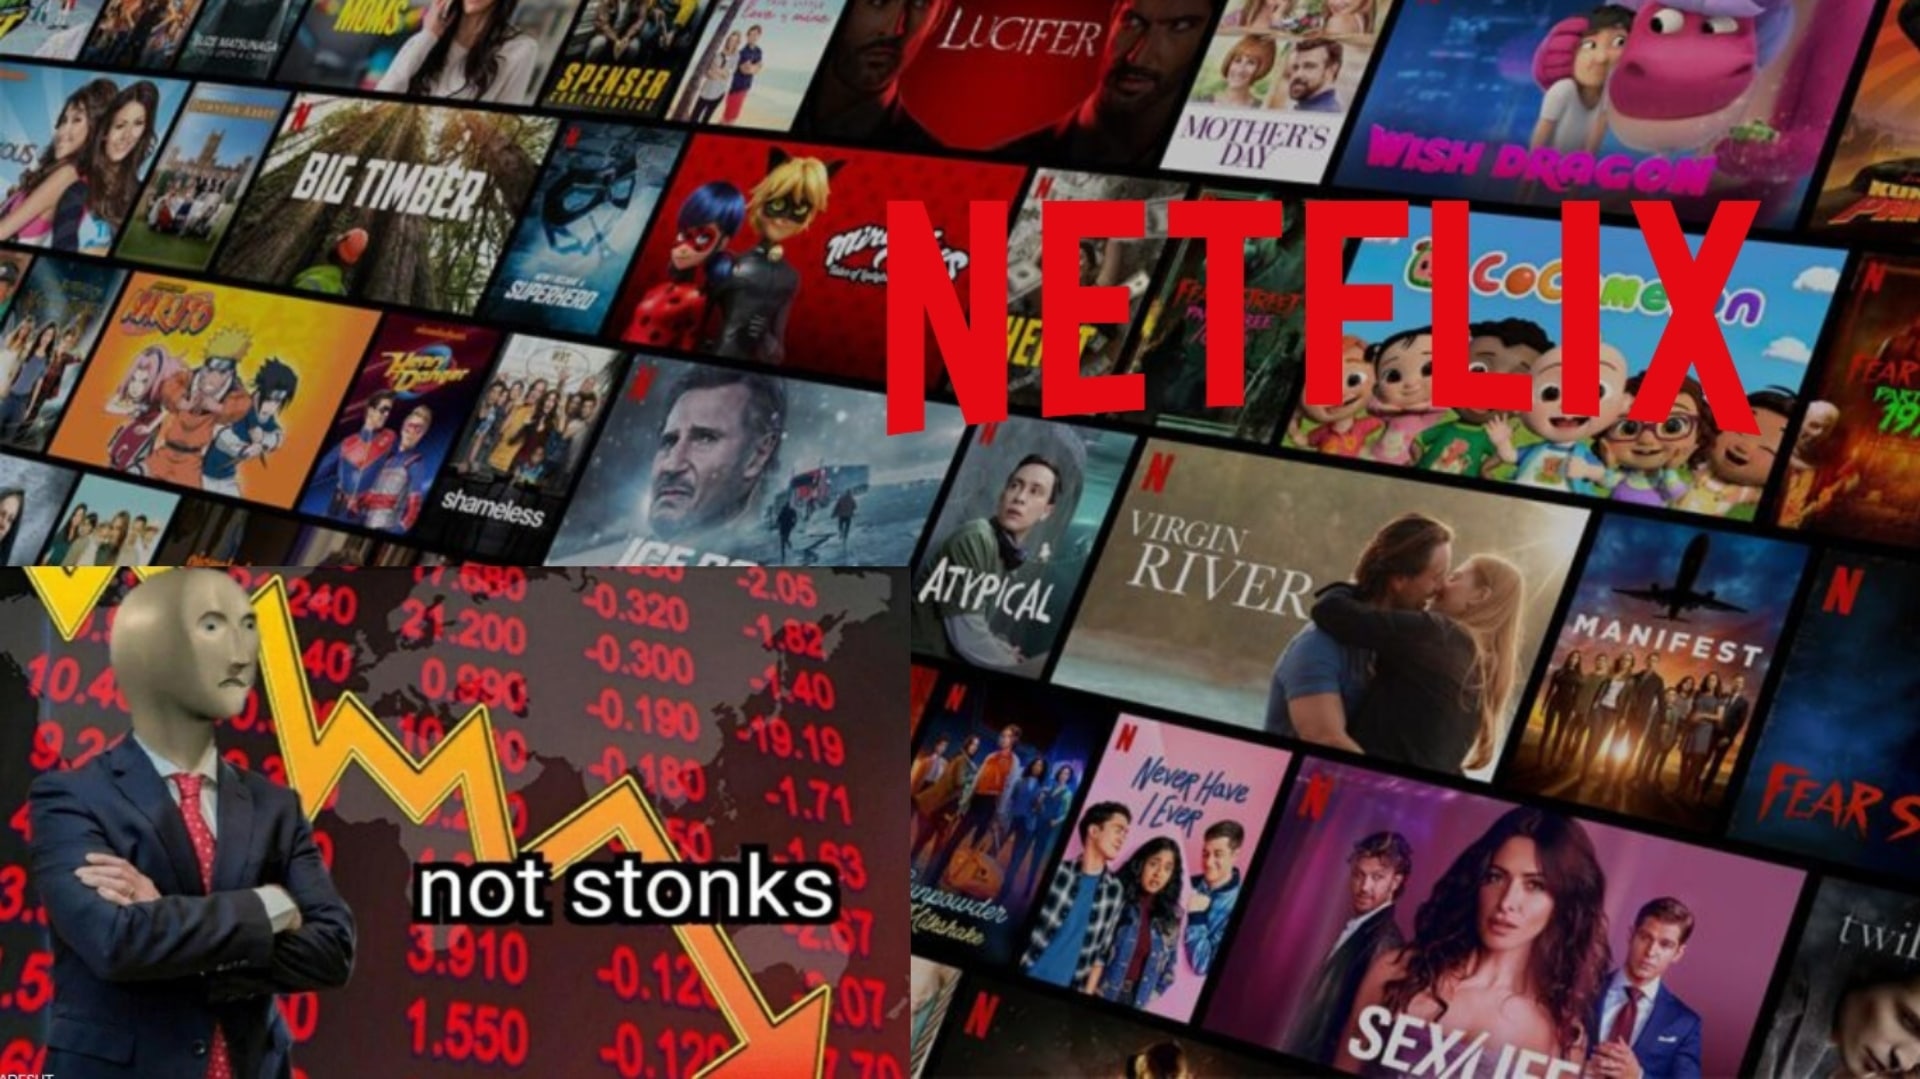 Netflix-Loses-200-thpousand-of suscribers-GamersRD (1)